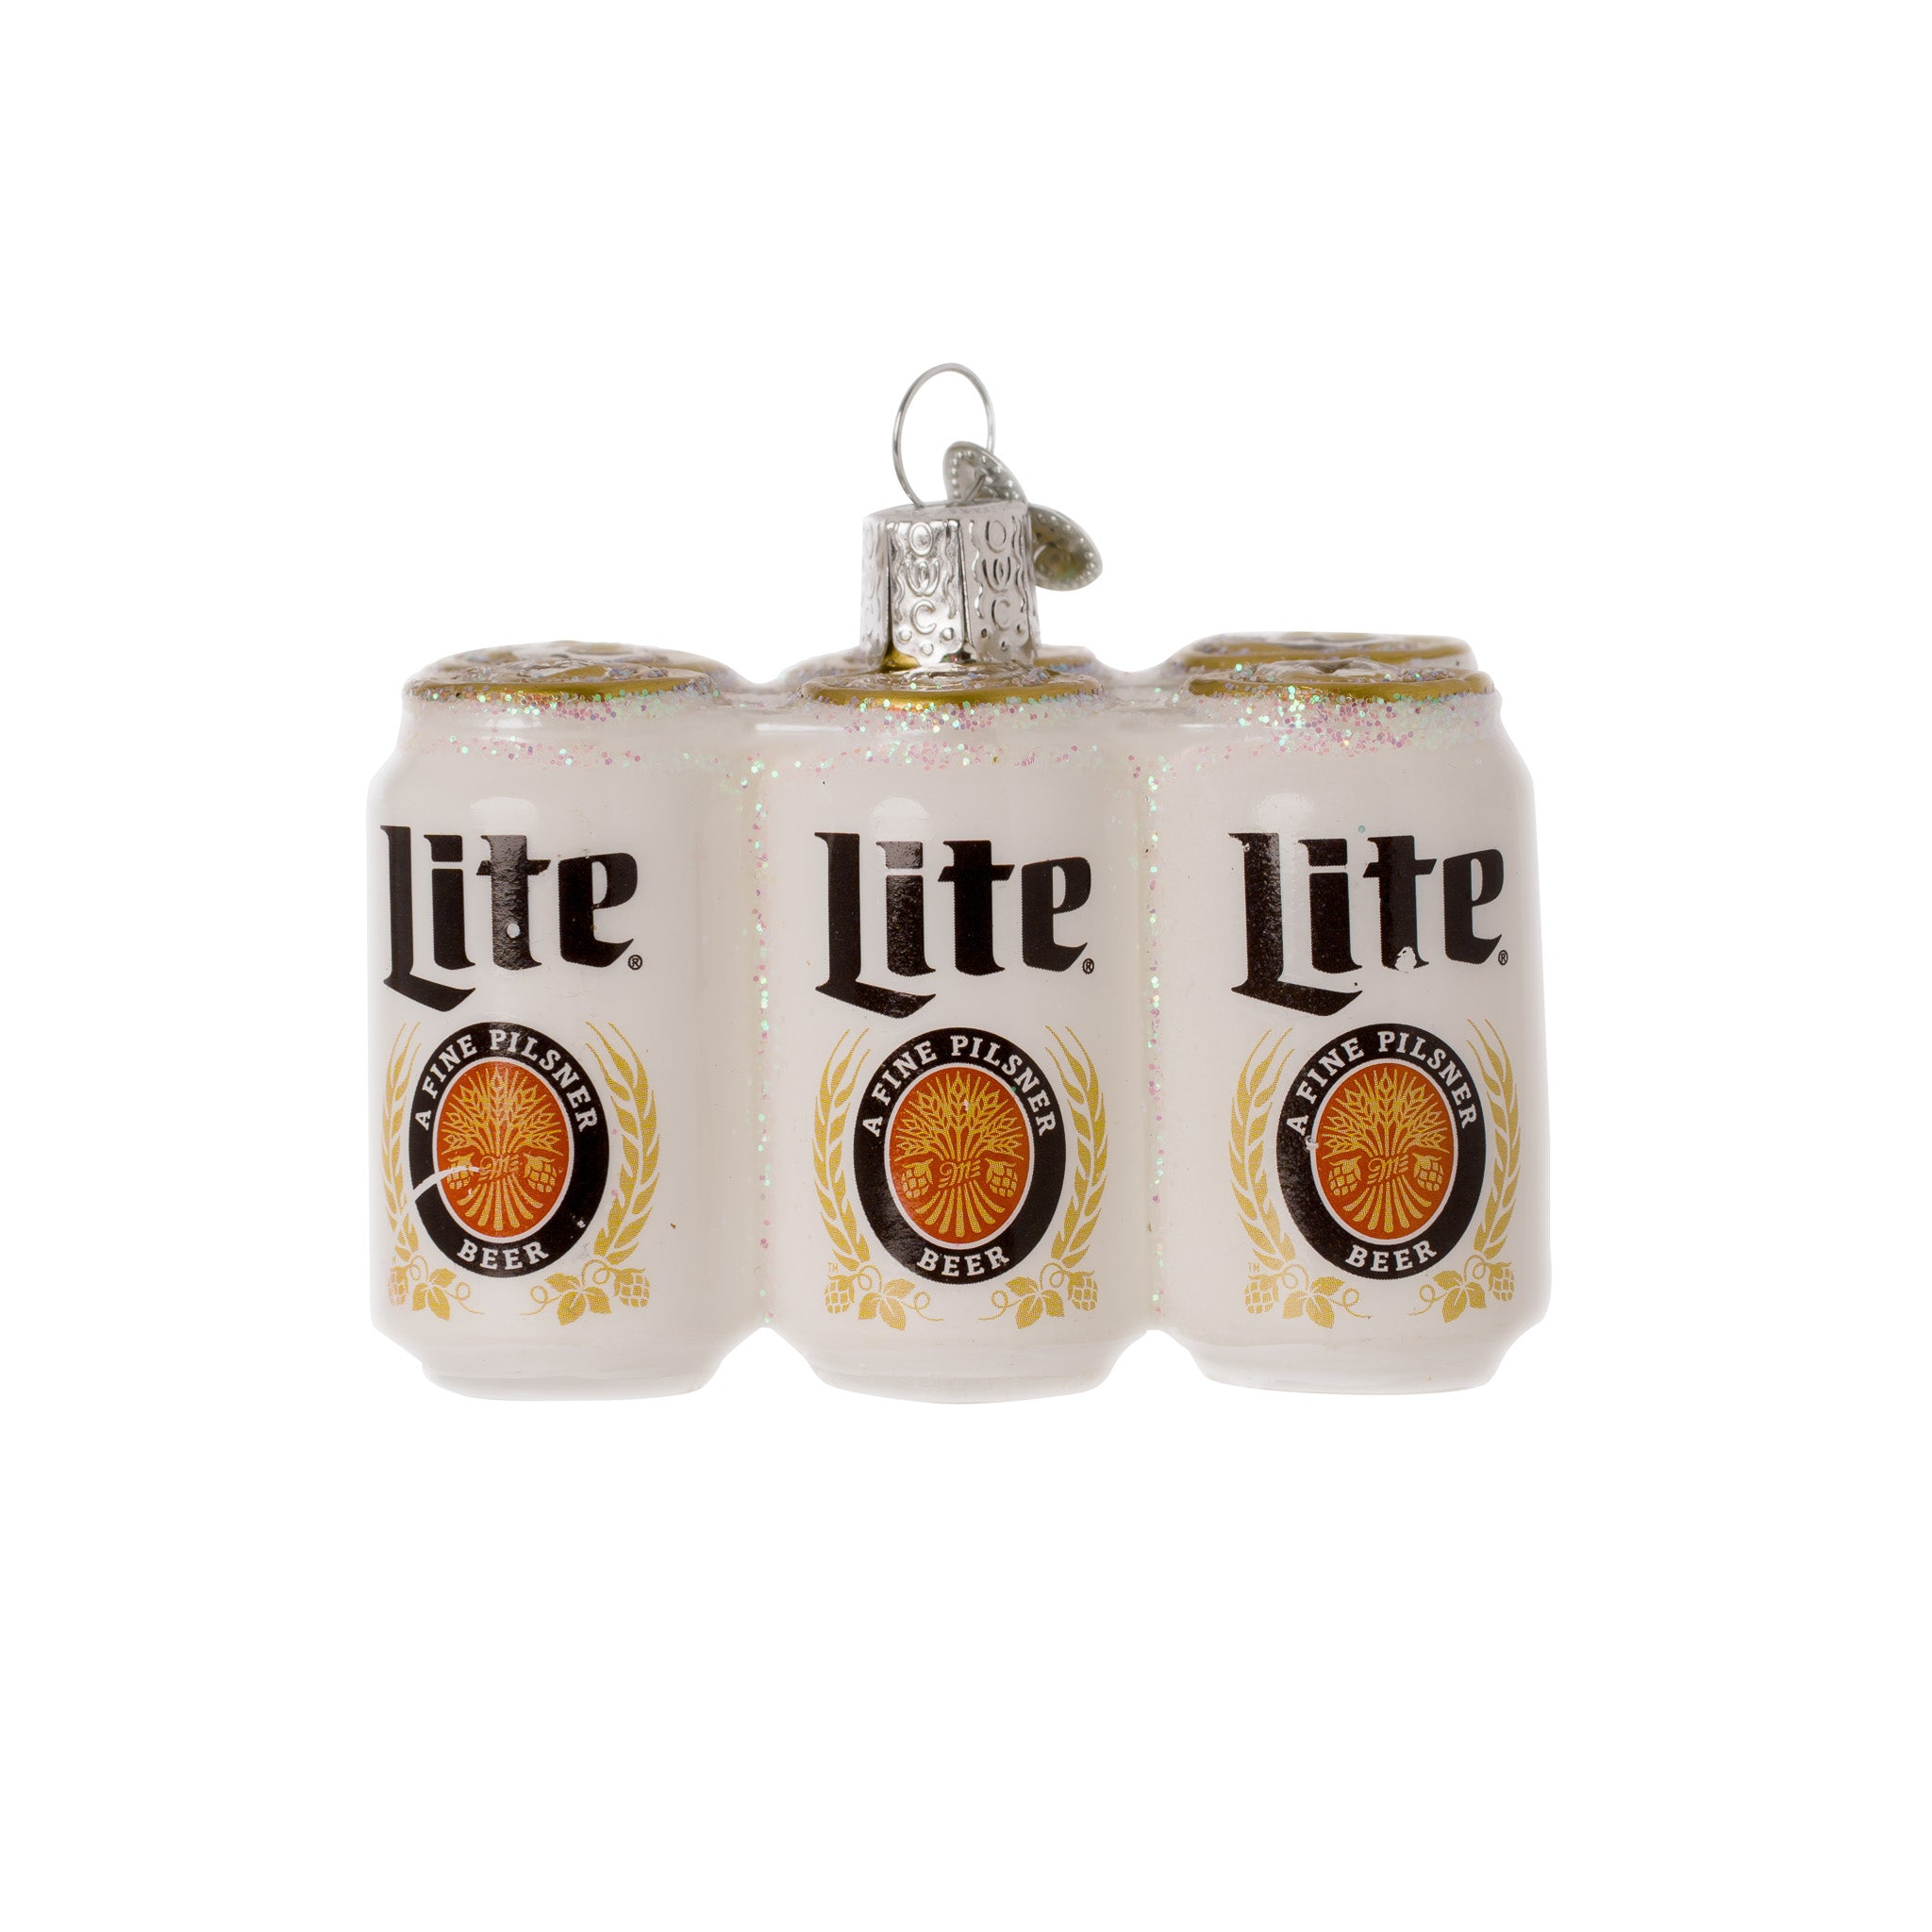 MILLER LITE SIX PACK HOLIDAY ORNAMENT